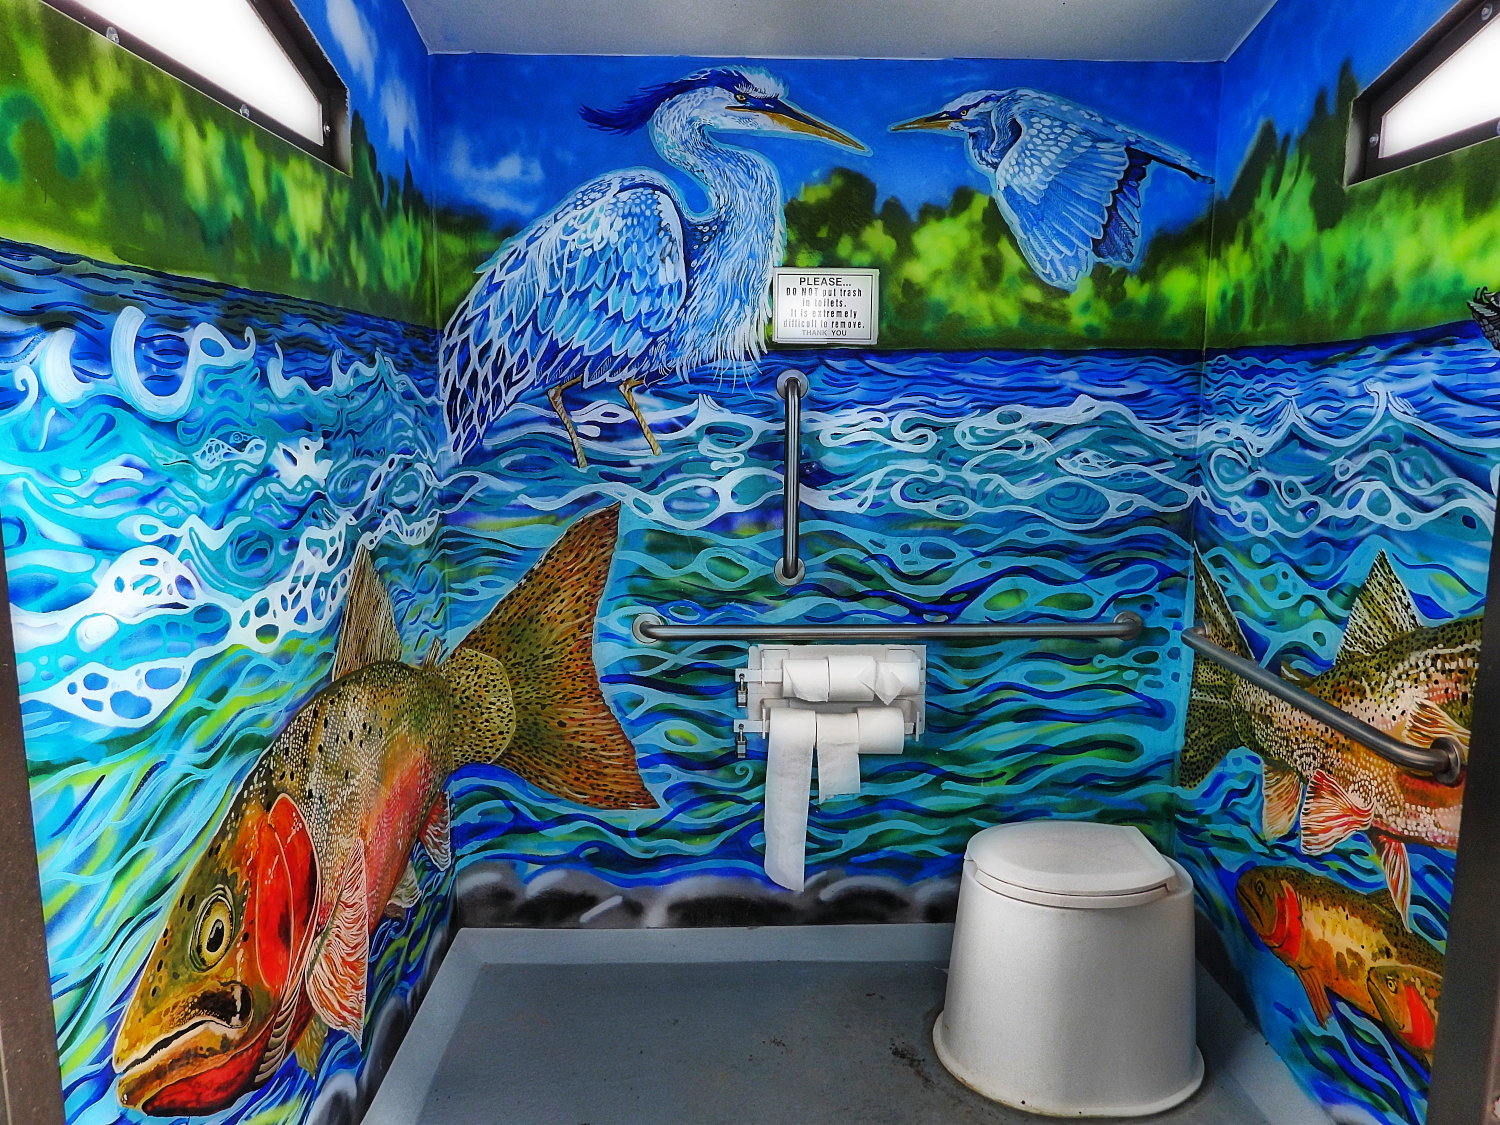 Feature image showing the murals painted by local artists in Idaho Falls District BLM. A colorful depiction of the Salmon River with salmon and birds